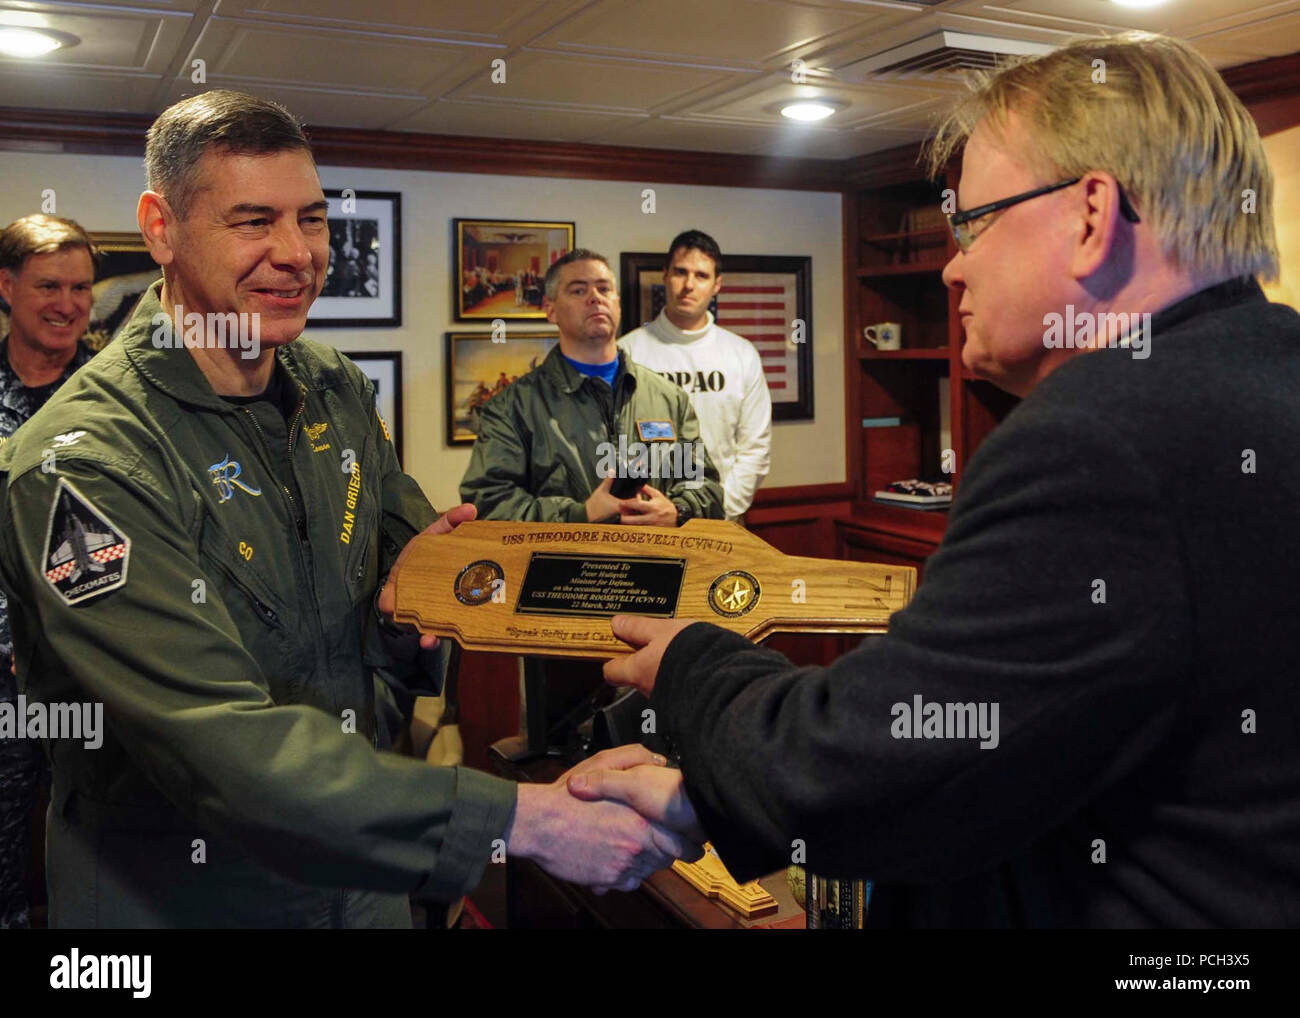 ATLANTIC OCEAN (March 22, 2015)  Commanding Officer of the Nimitz-class aircraft carrier USS Theodore Roosevelt (CVN 71) Capt. Daniel Grieco, left, presents a token of appreciation to the Swedish Minister of Defence Peter Hultqvist aboard Theodore Roosevelt March 22, 2015. Theodore Roosevelt, homeported in Norfolk, is conducting naval operations in the U.S. 6th Fleet area of operations in support of U.S. national security interests in Europe. Stock Photo